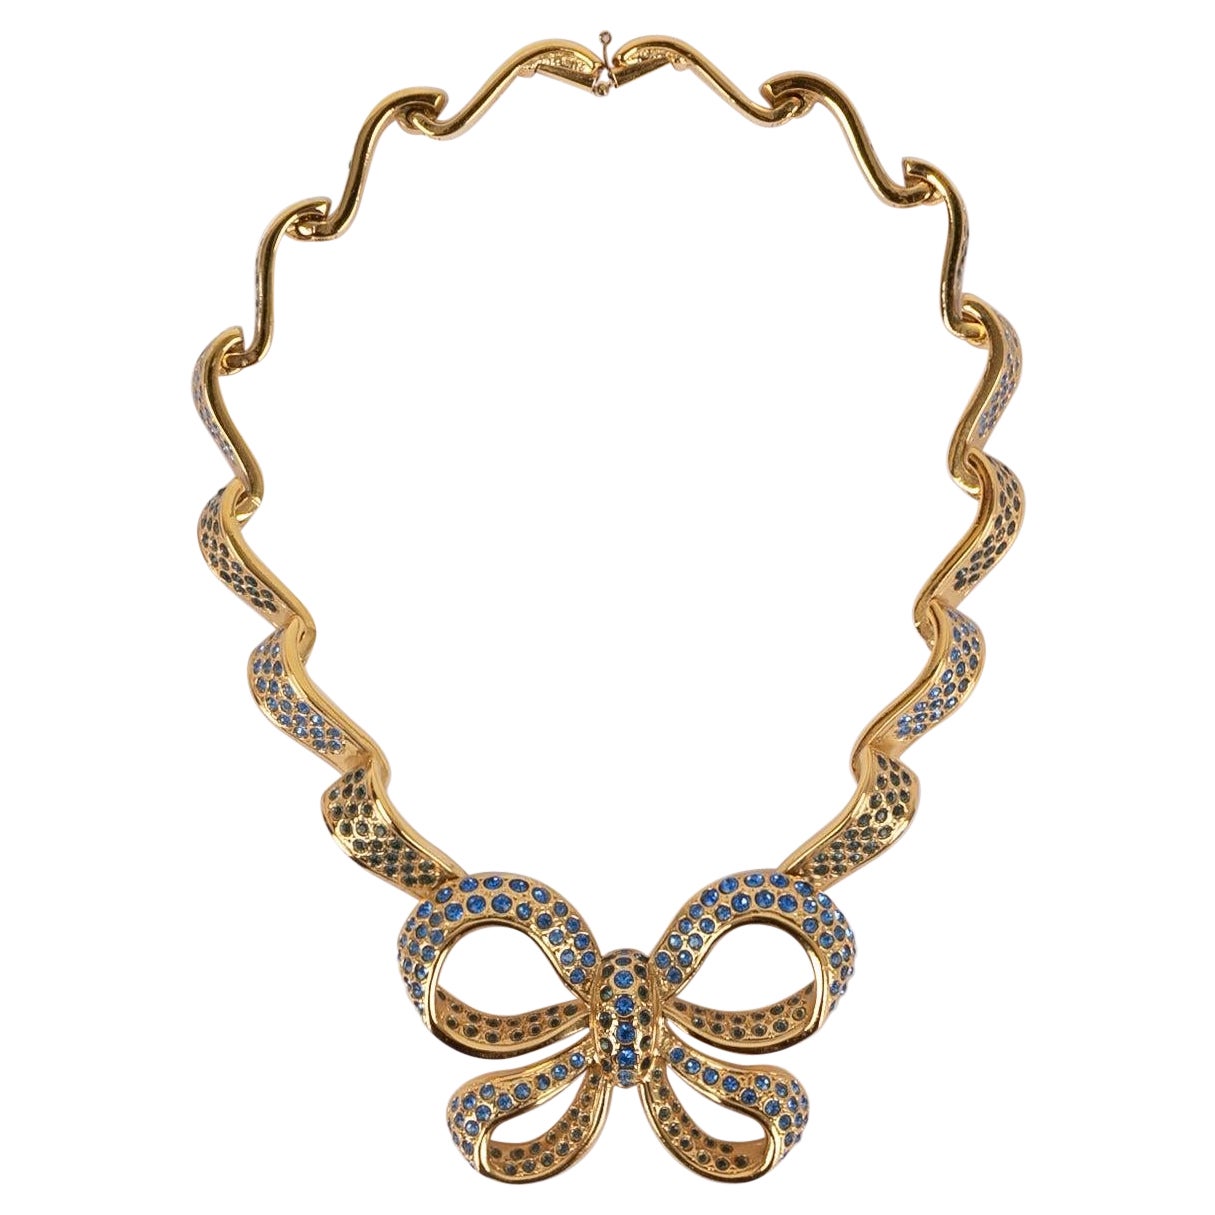 Yves Saint Laurent Bow Necklace in Gold Metal